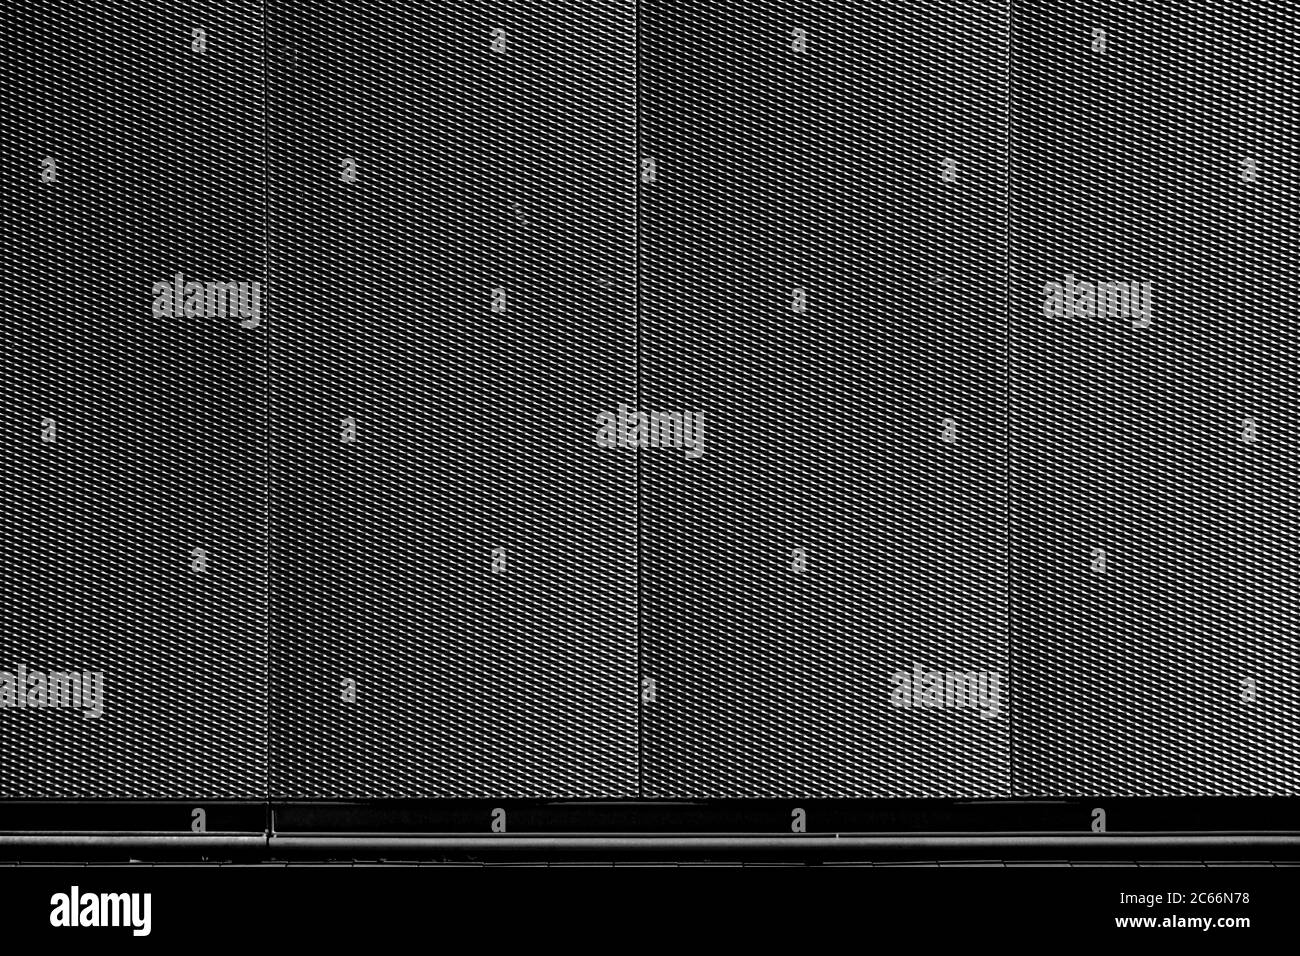 Close-up of a metal grille of a modern facade of a business building, Stock Photo